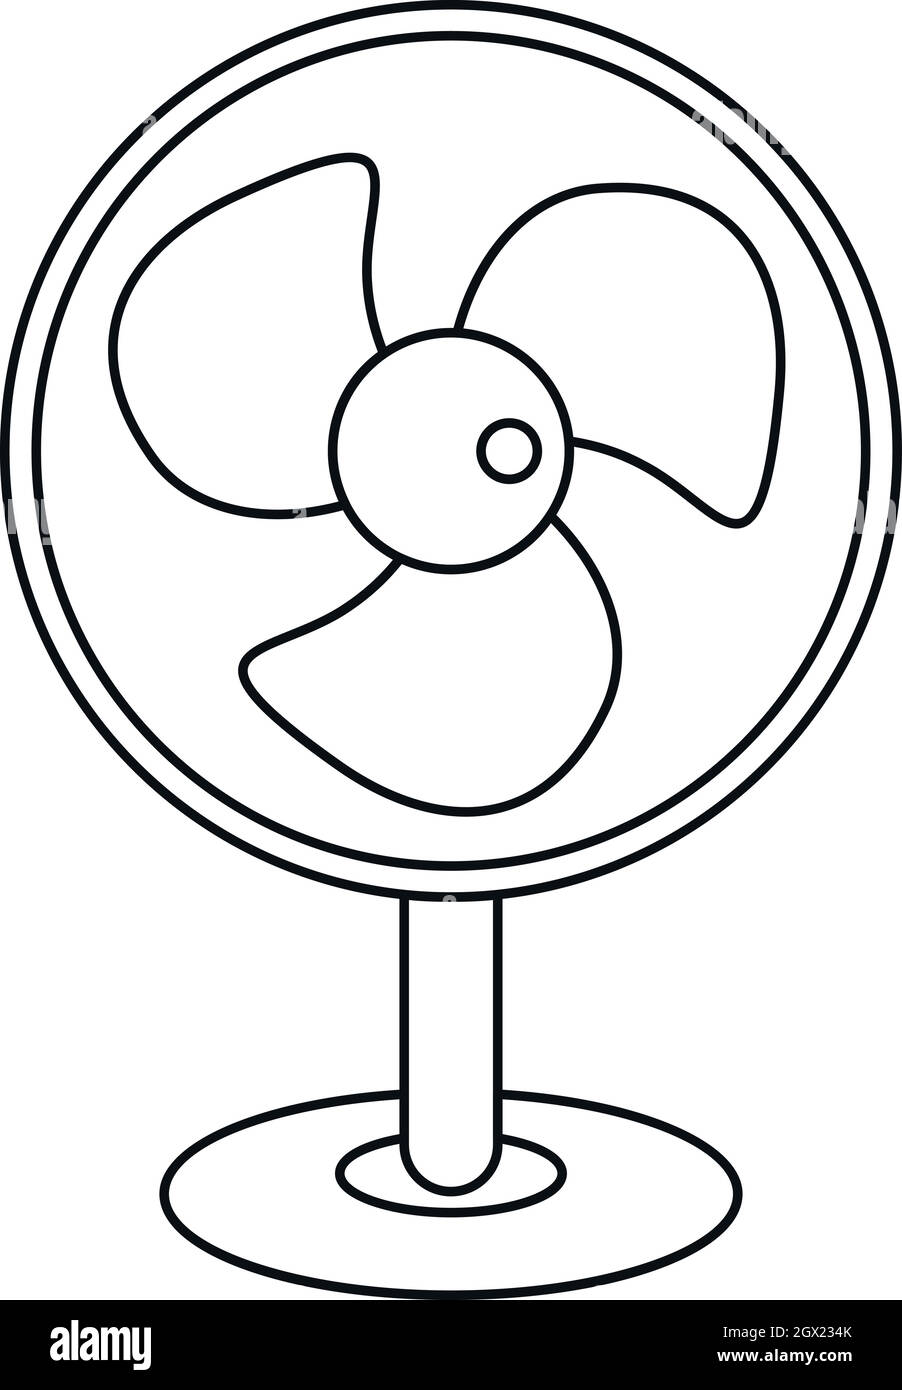 table fan clipart black and white